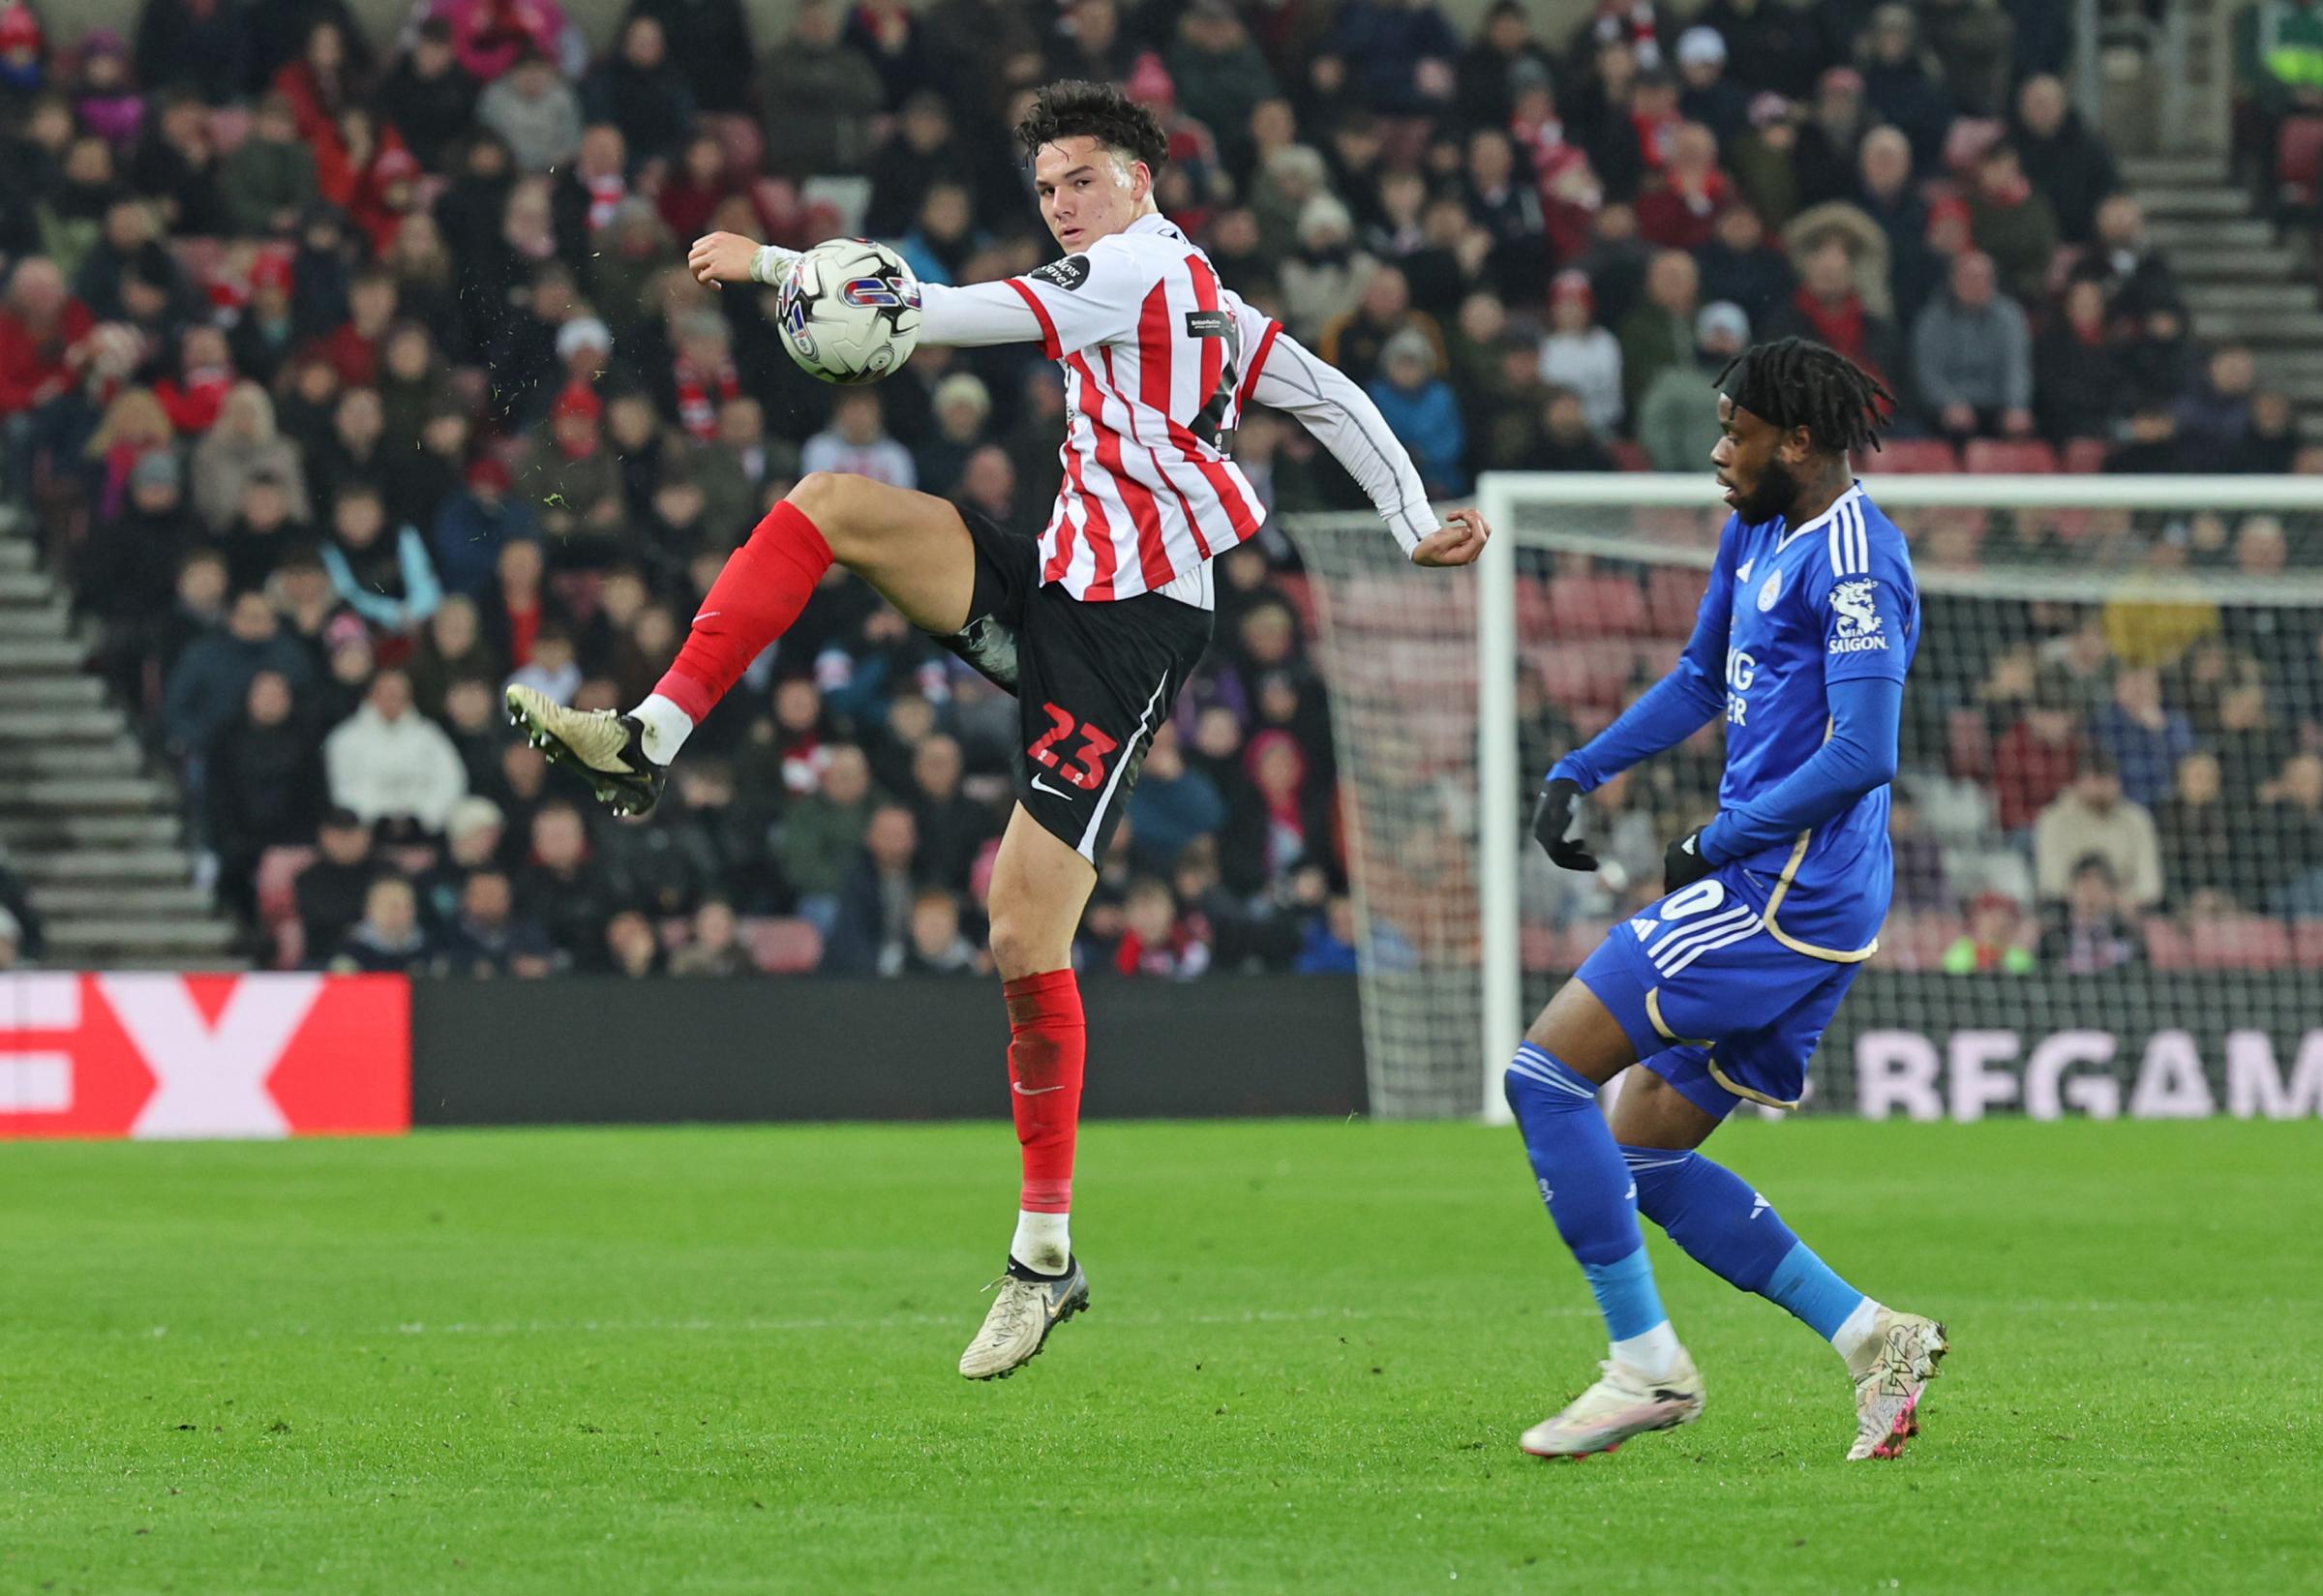 Sunderland defender Jenson Seelt happy with recovery from knee injury